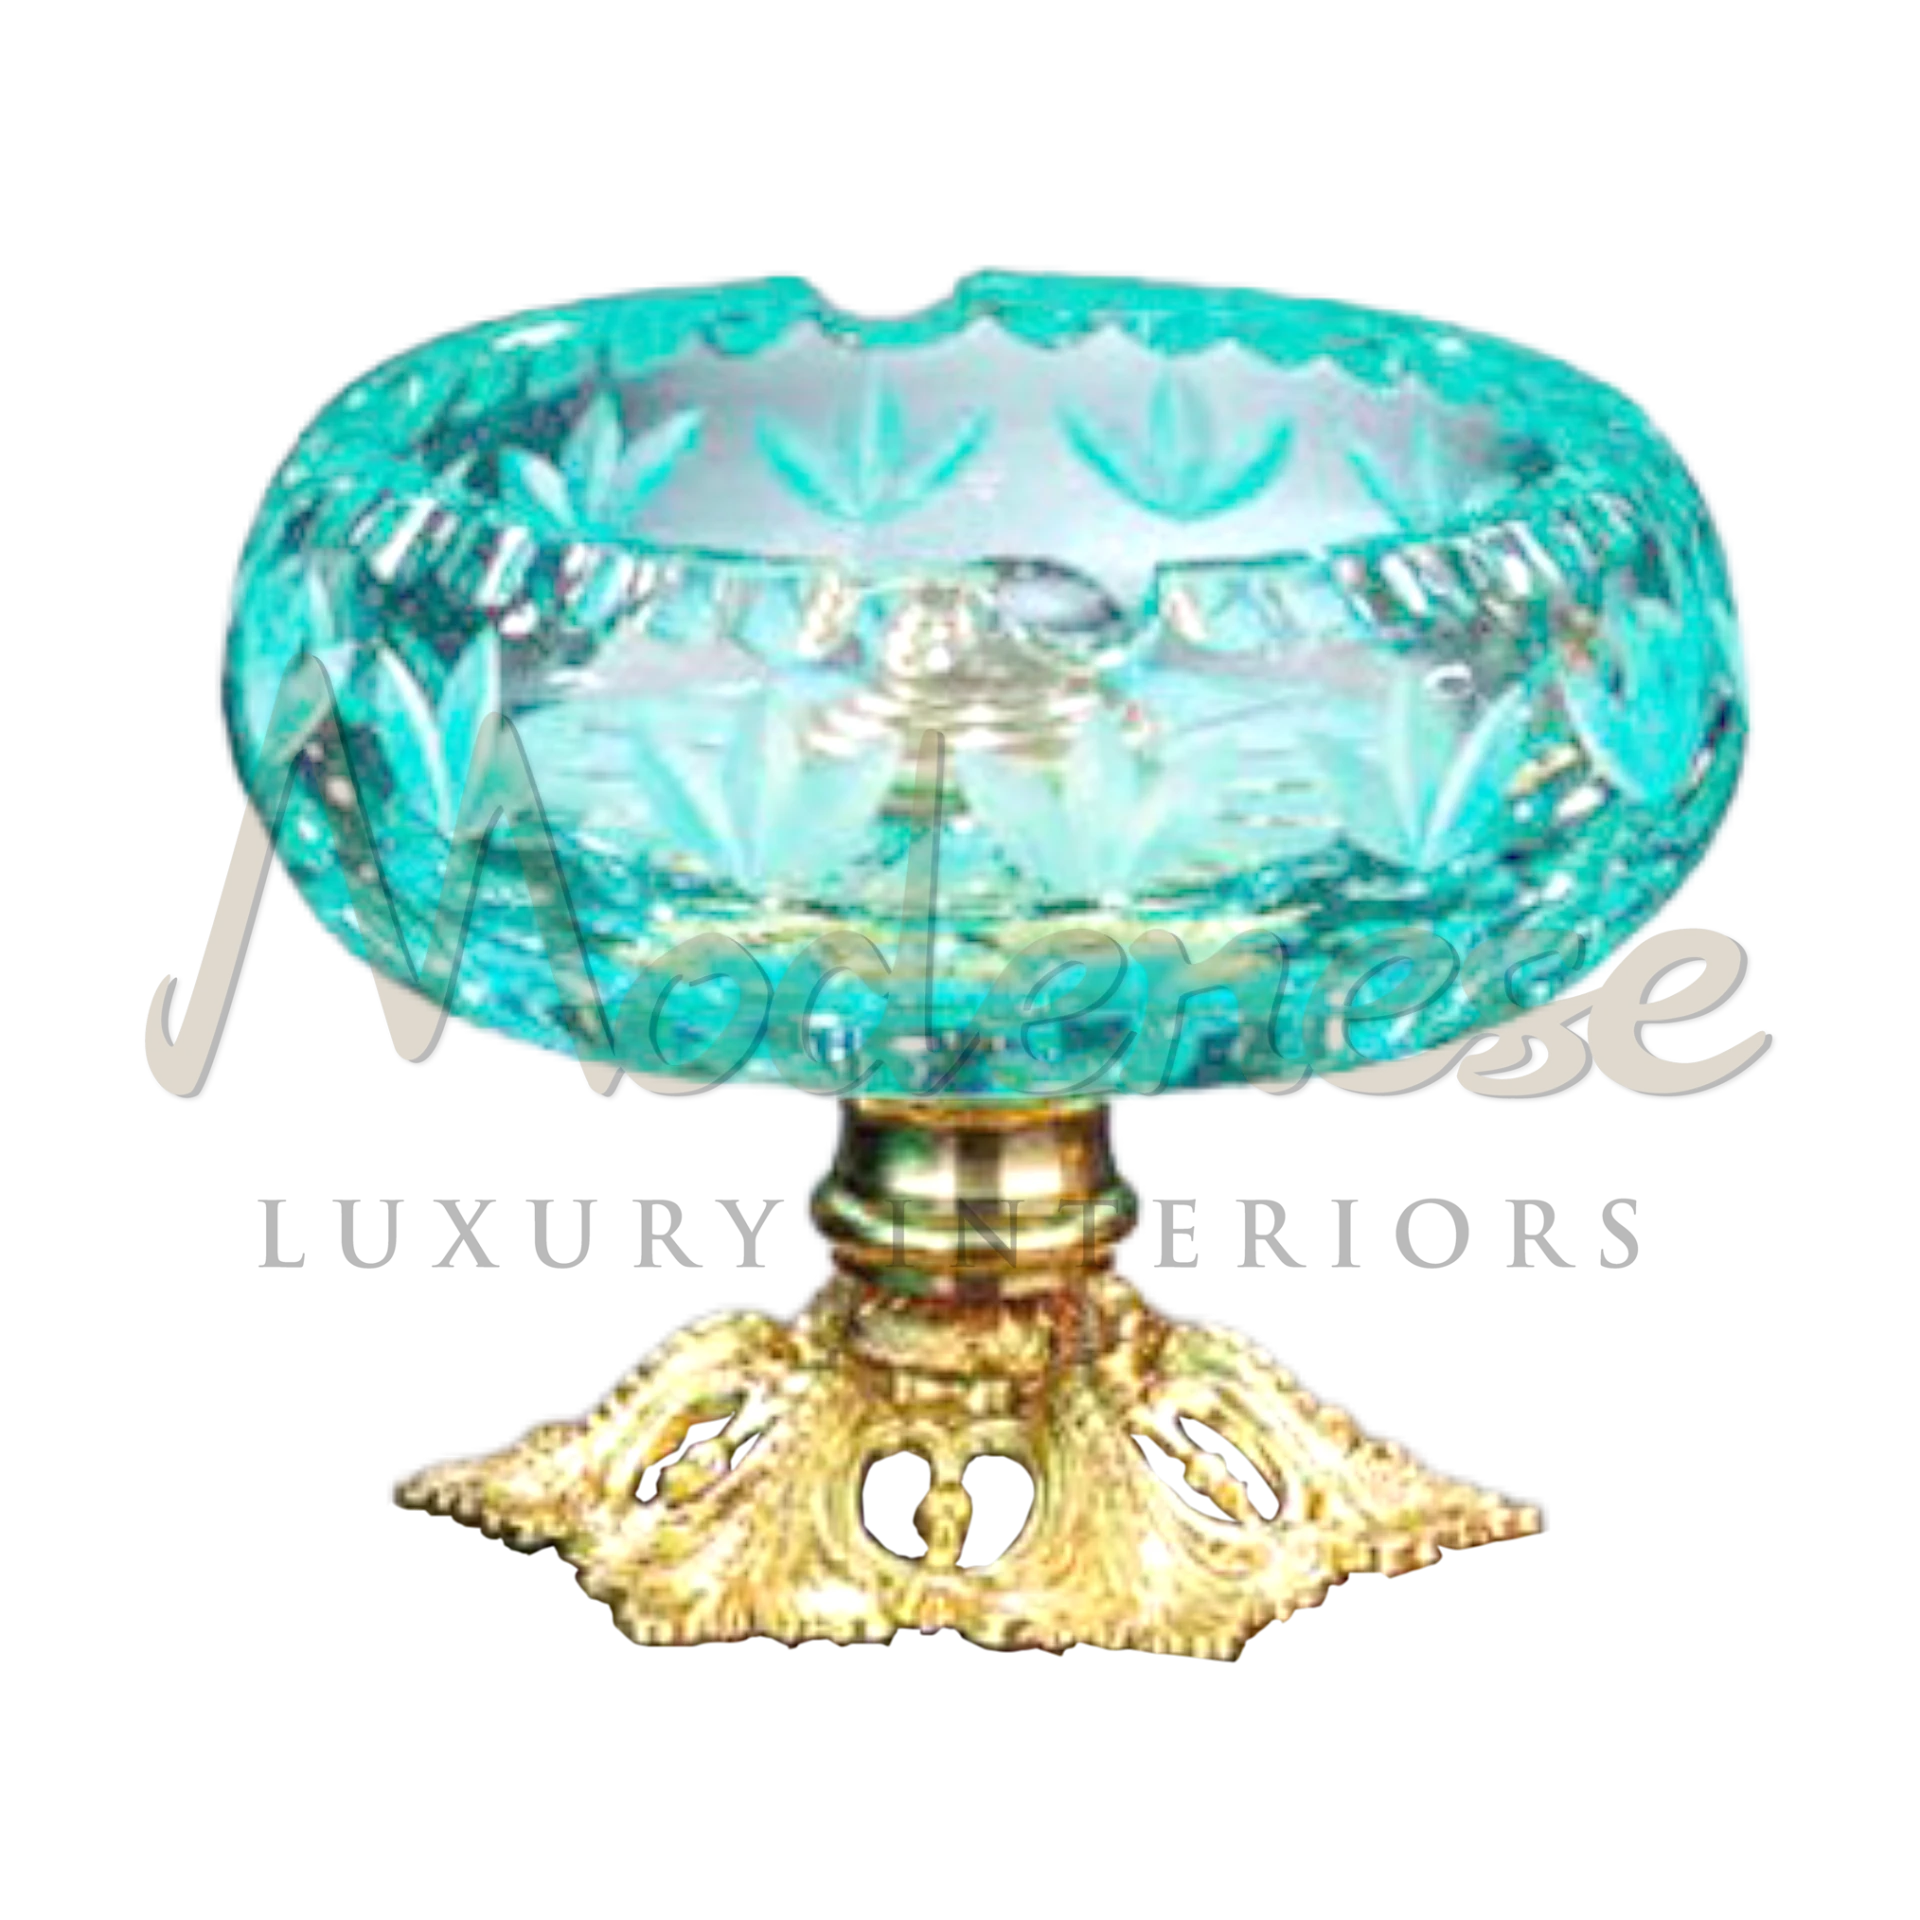 Luxurious Royal Wide Turquoise Bowl in baroque style, perfect for interior designers seeking a classic, substantial vase for luxury interiors.